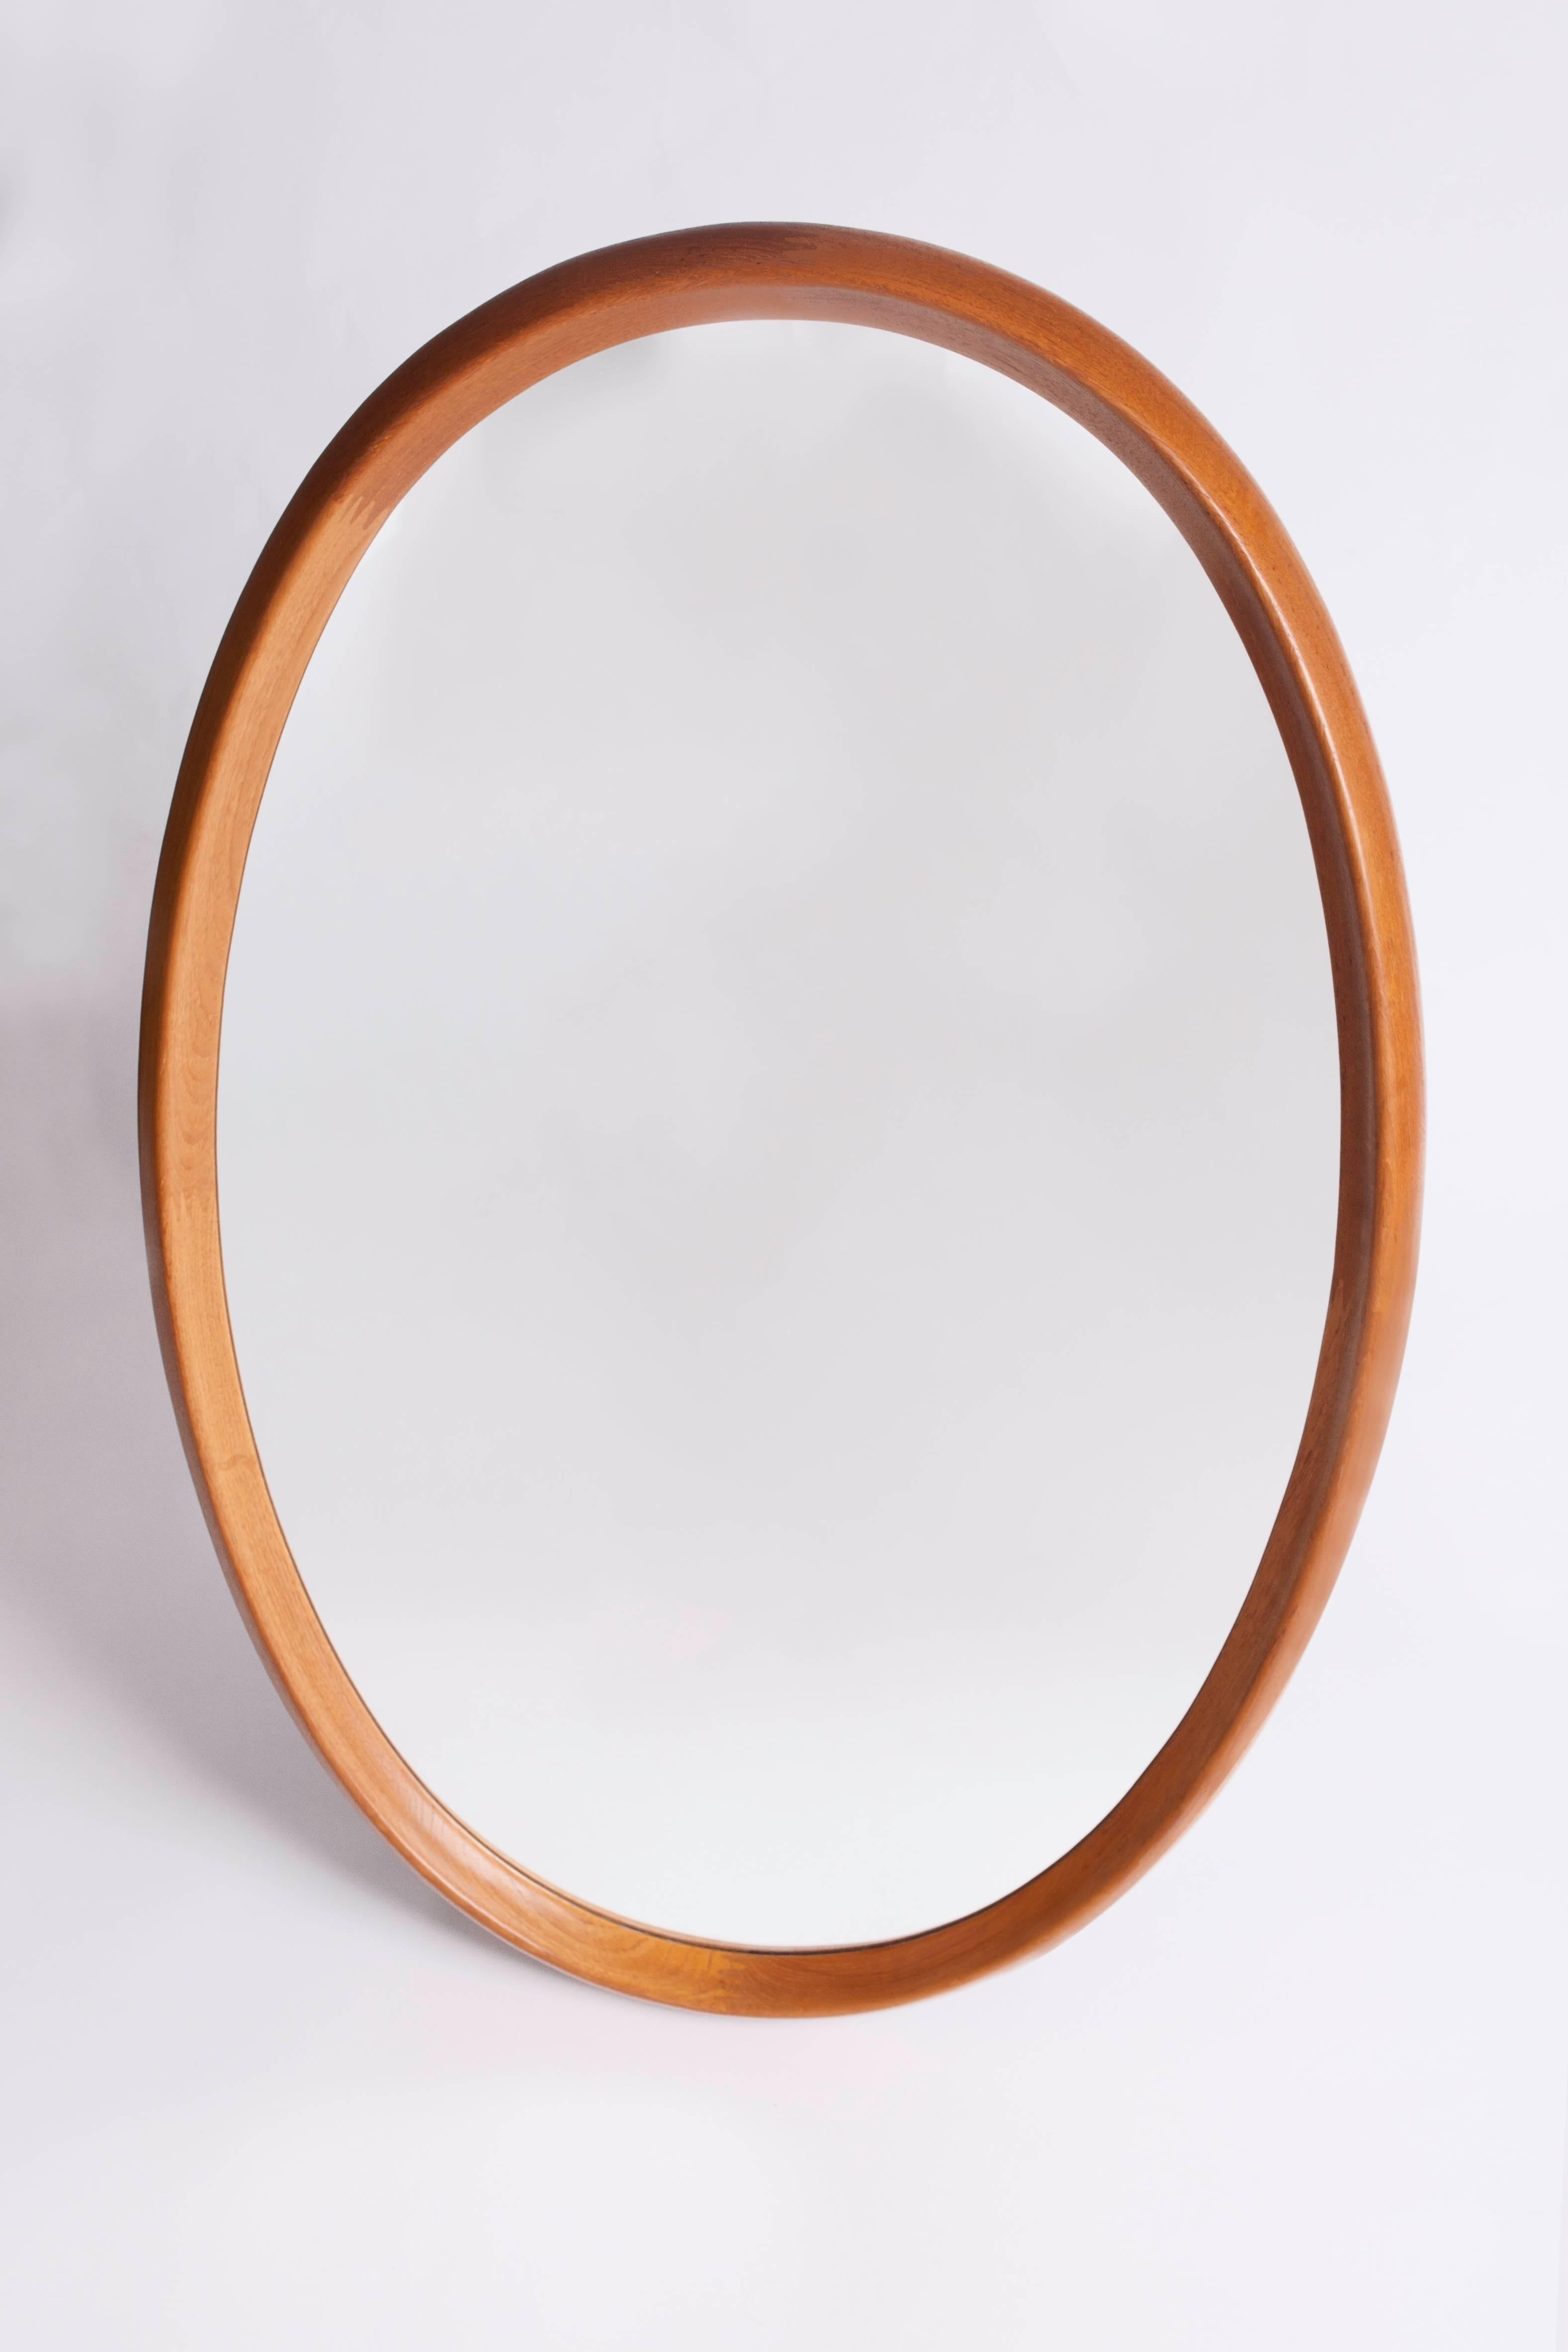 A monumental, finely crafted Scandinavian Modern oval mirror with a geometric zipper motif by Pedersen & Hansen. In sculptural two-inch thick teak, with a deep and curved bevel and beautiful two-tone interlocking dovetail joinery. Denmark, 1960's.